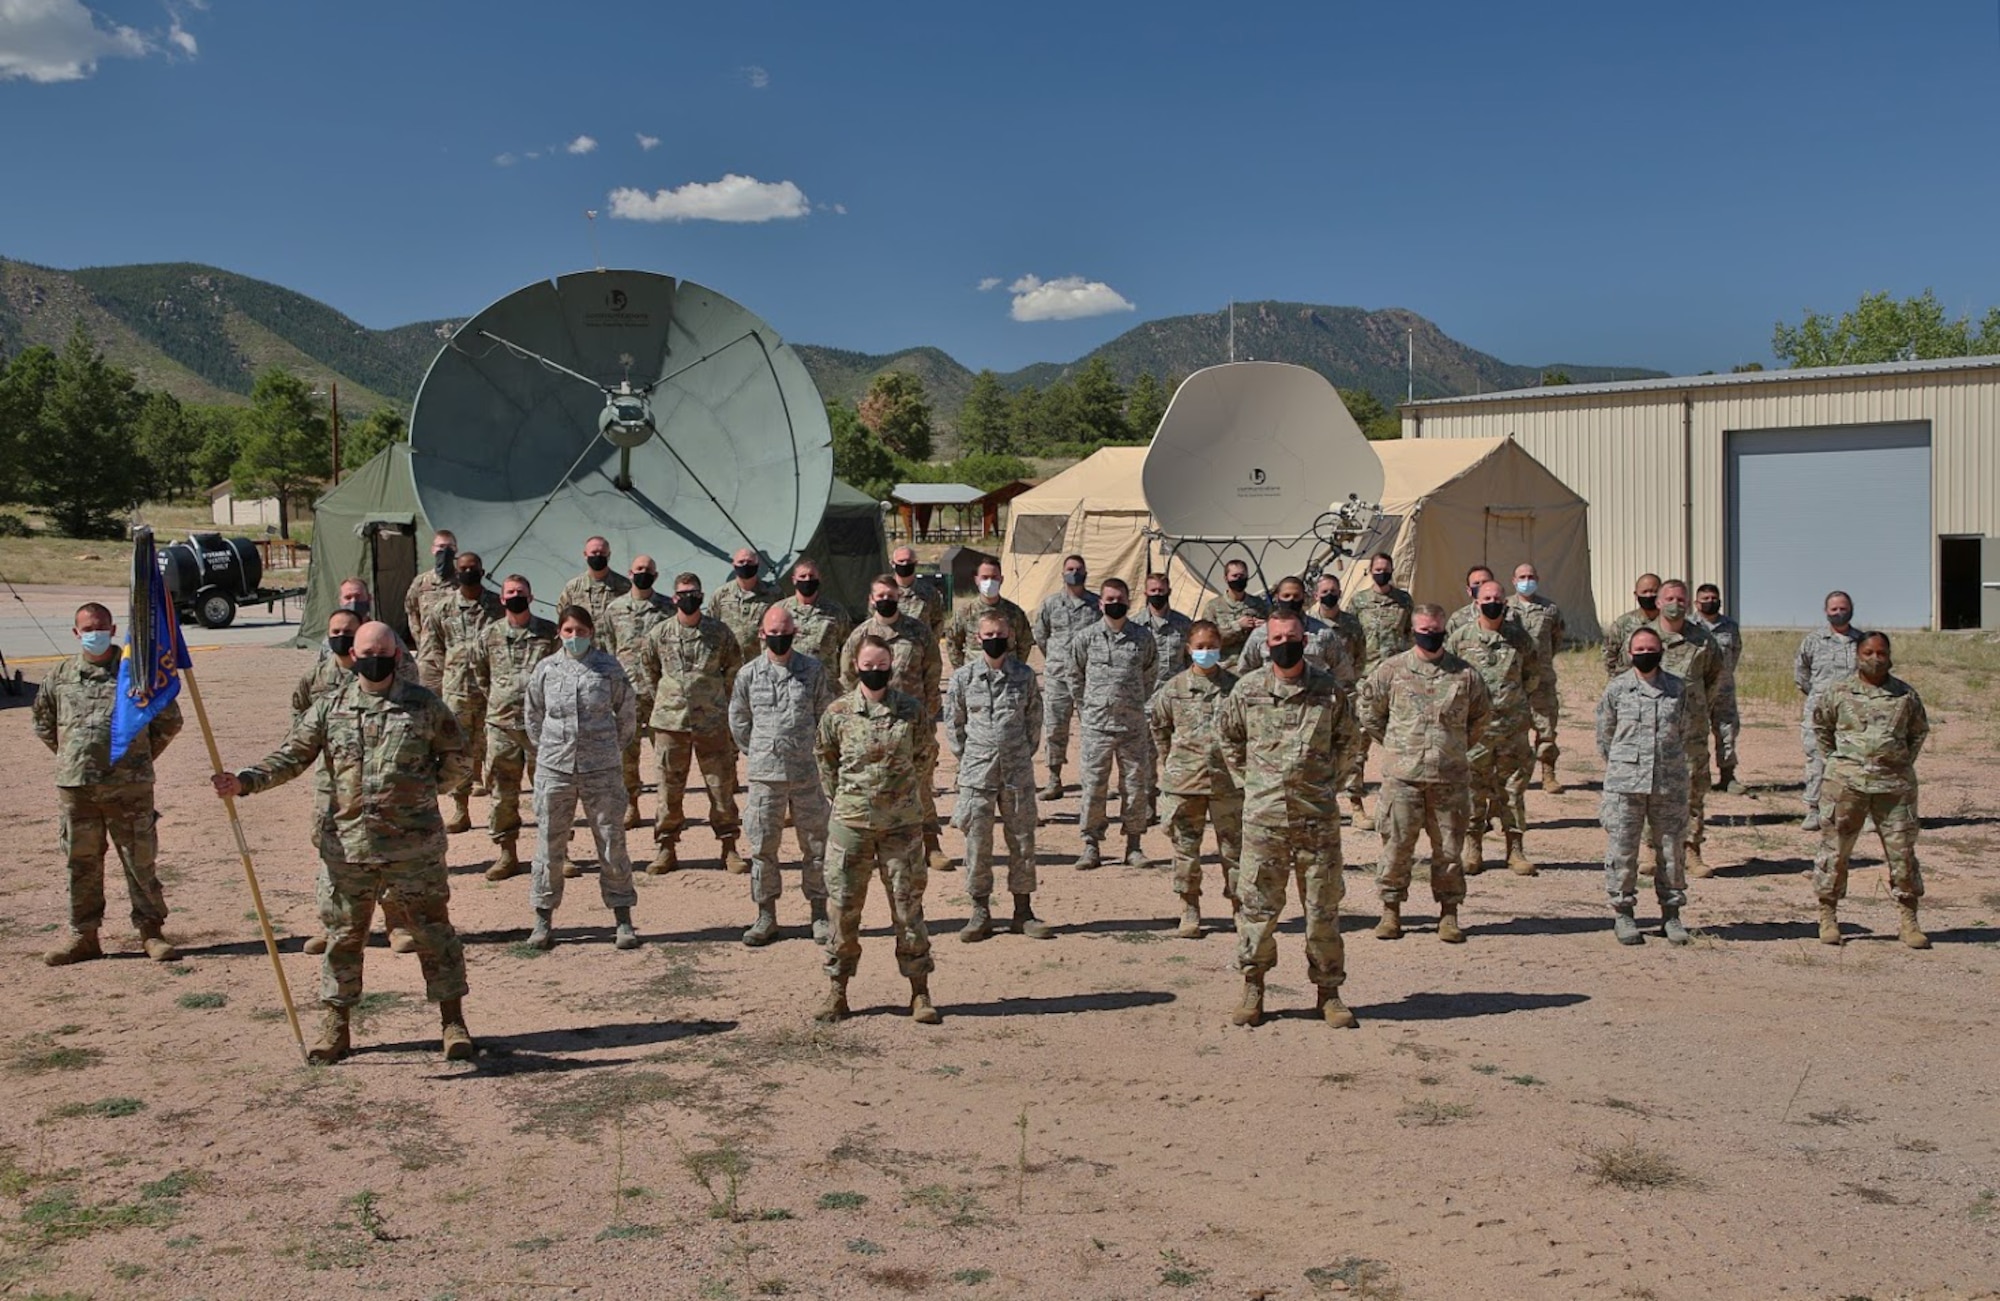 The 379th Space Range Squadron poses in front of their deployable mission equipment during the 379th SRS Field Training Exercise, Sept. 10-13, 2020, at the United States Air Force Academy's Field Engineering Readiness Laboratory, Colorado. Despite obstacles, this event marked the 379th SRS’s first major training exercise during the COVID-19 pandemic. (U.S. Air Force photo by Capt. Jordan Wind)